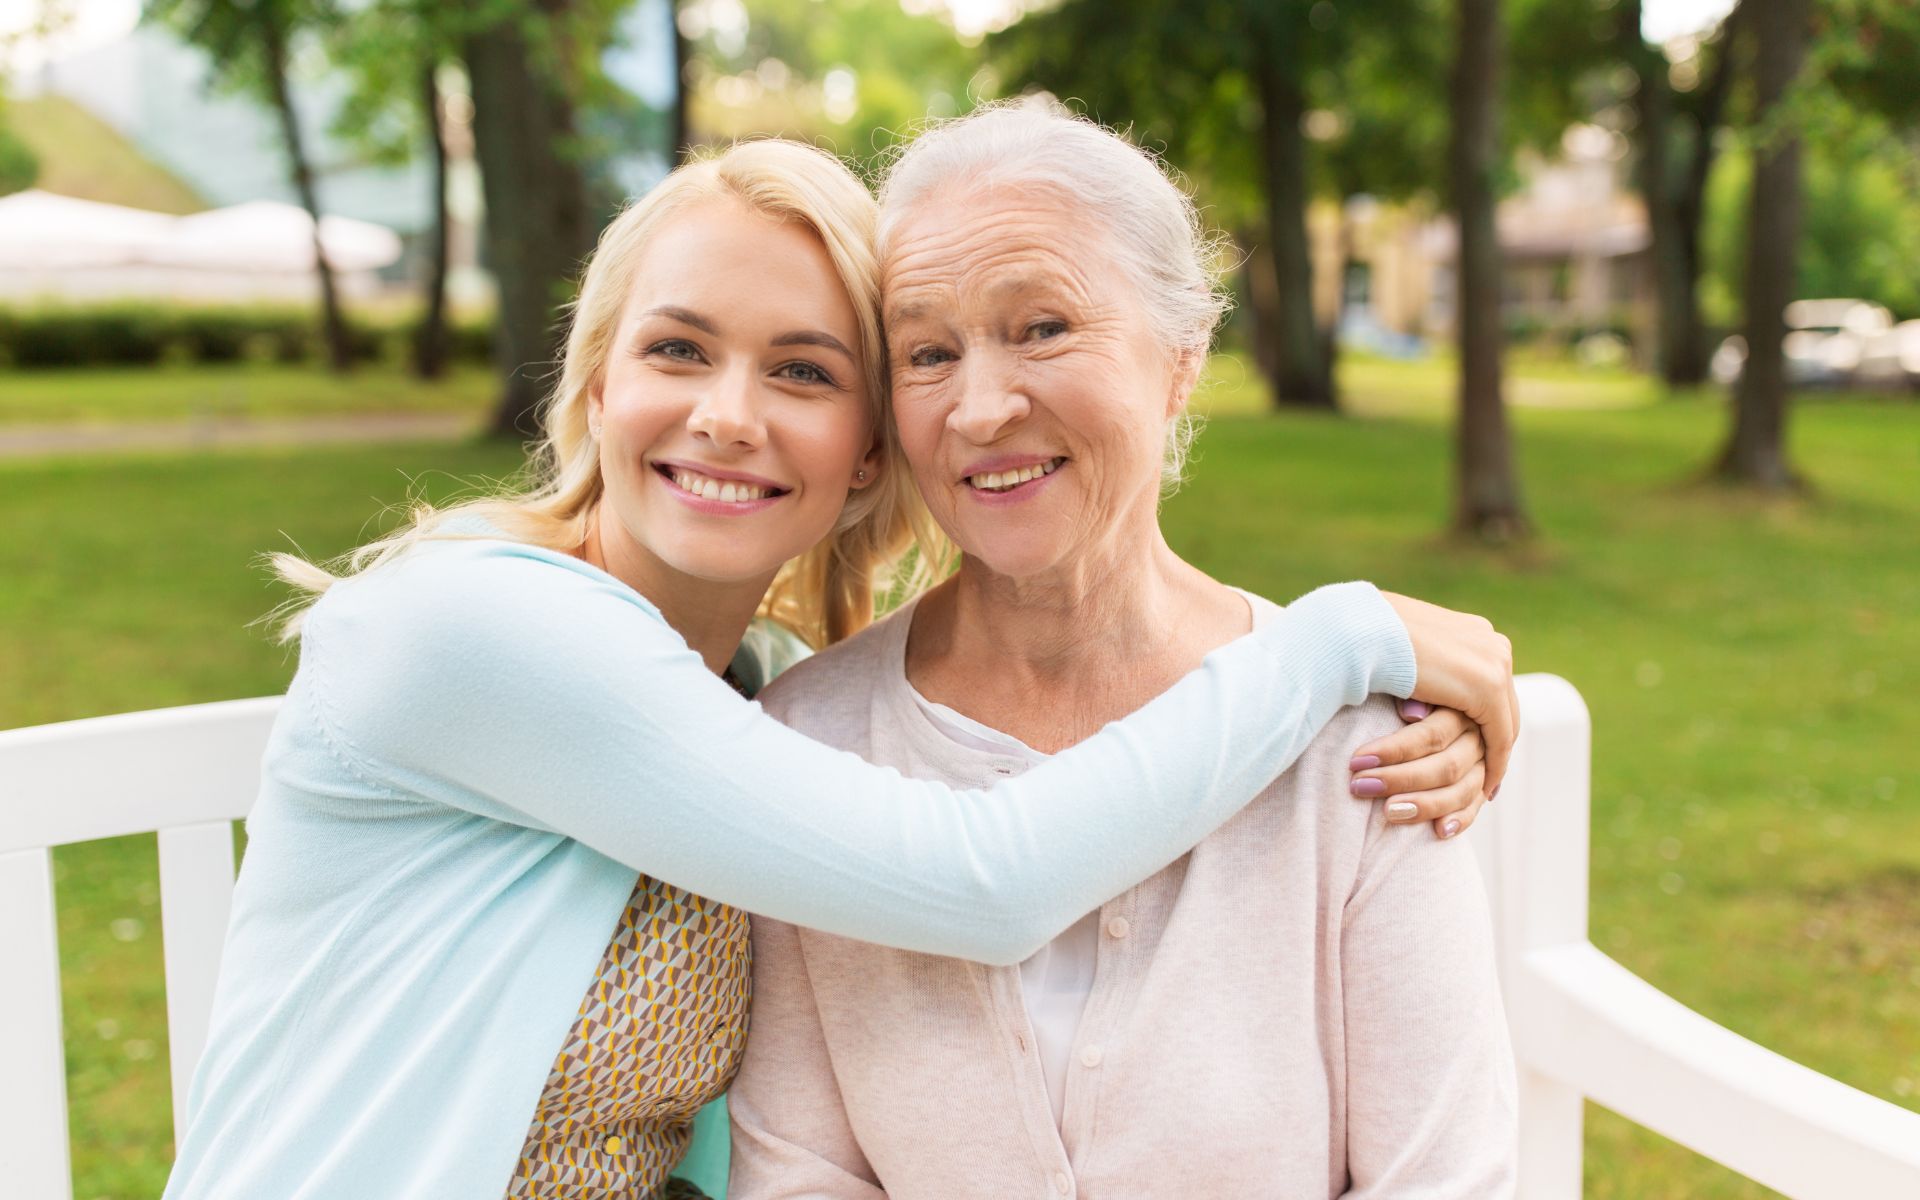 How to Find the Right Caregiver for You or Your Loved One